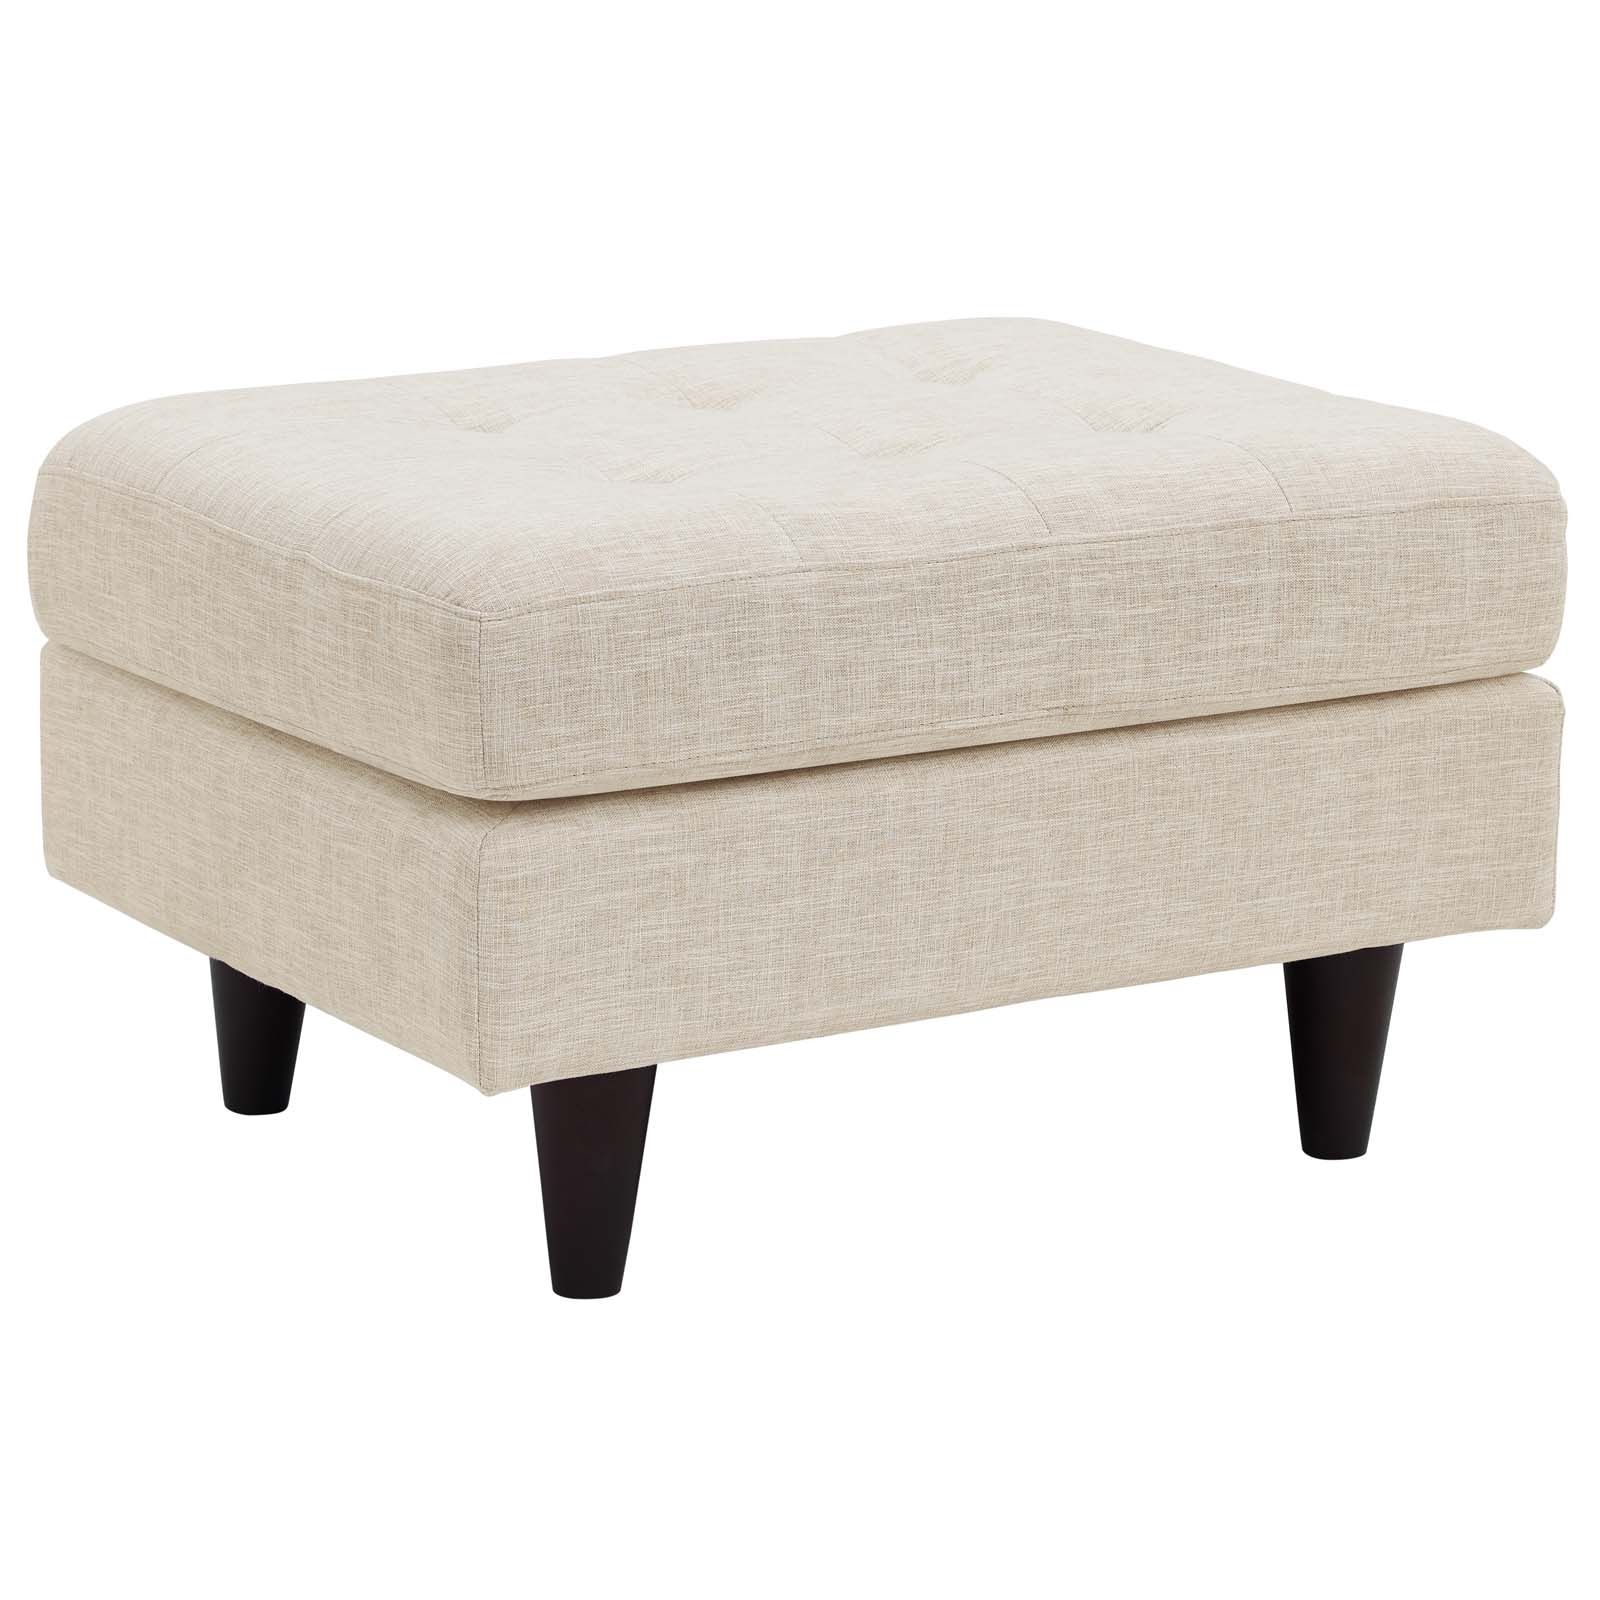 Modway Empress Upholstered Fabric Ottoman, Multiple Colors – Walmart With Multi Color Fabric Square Ottomans (View 12 of 20)